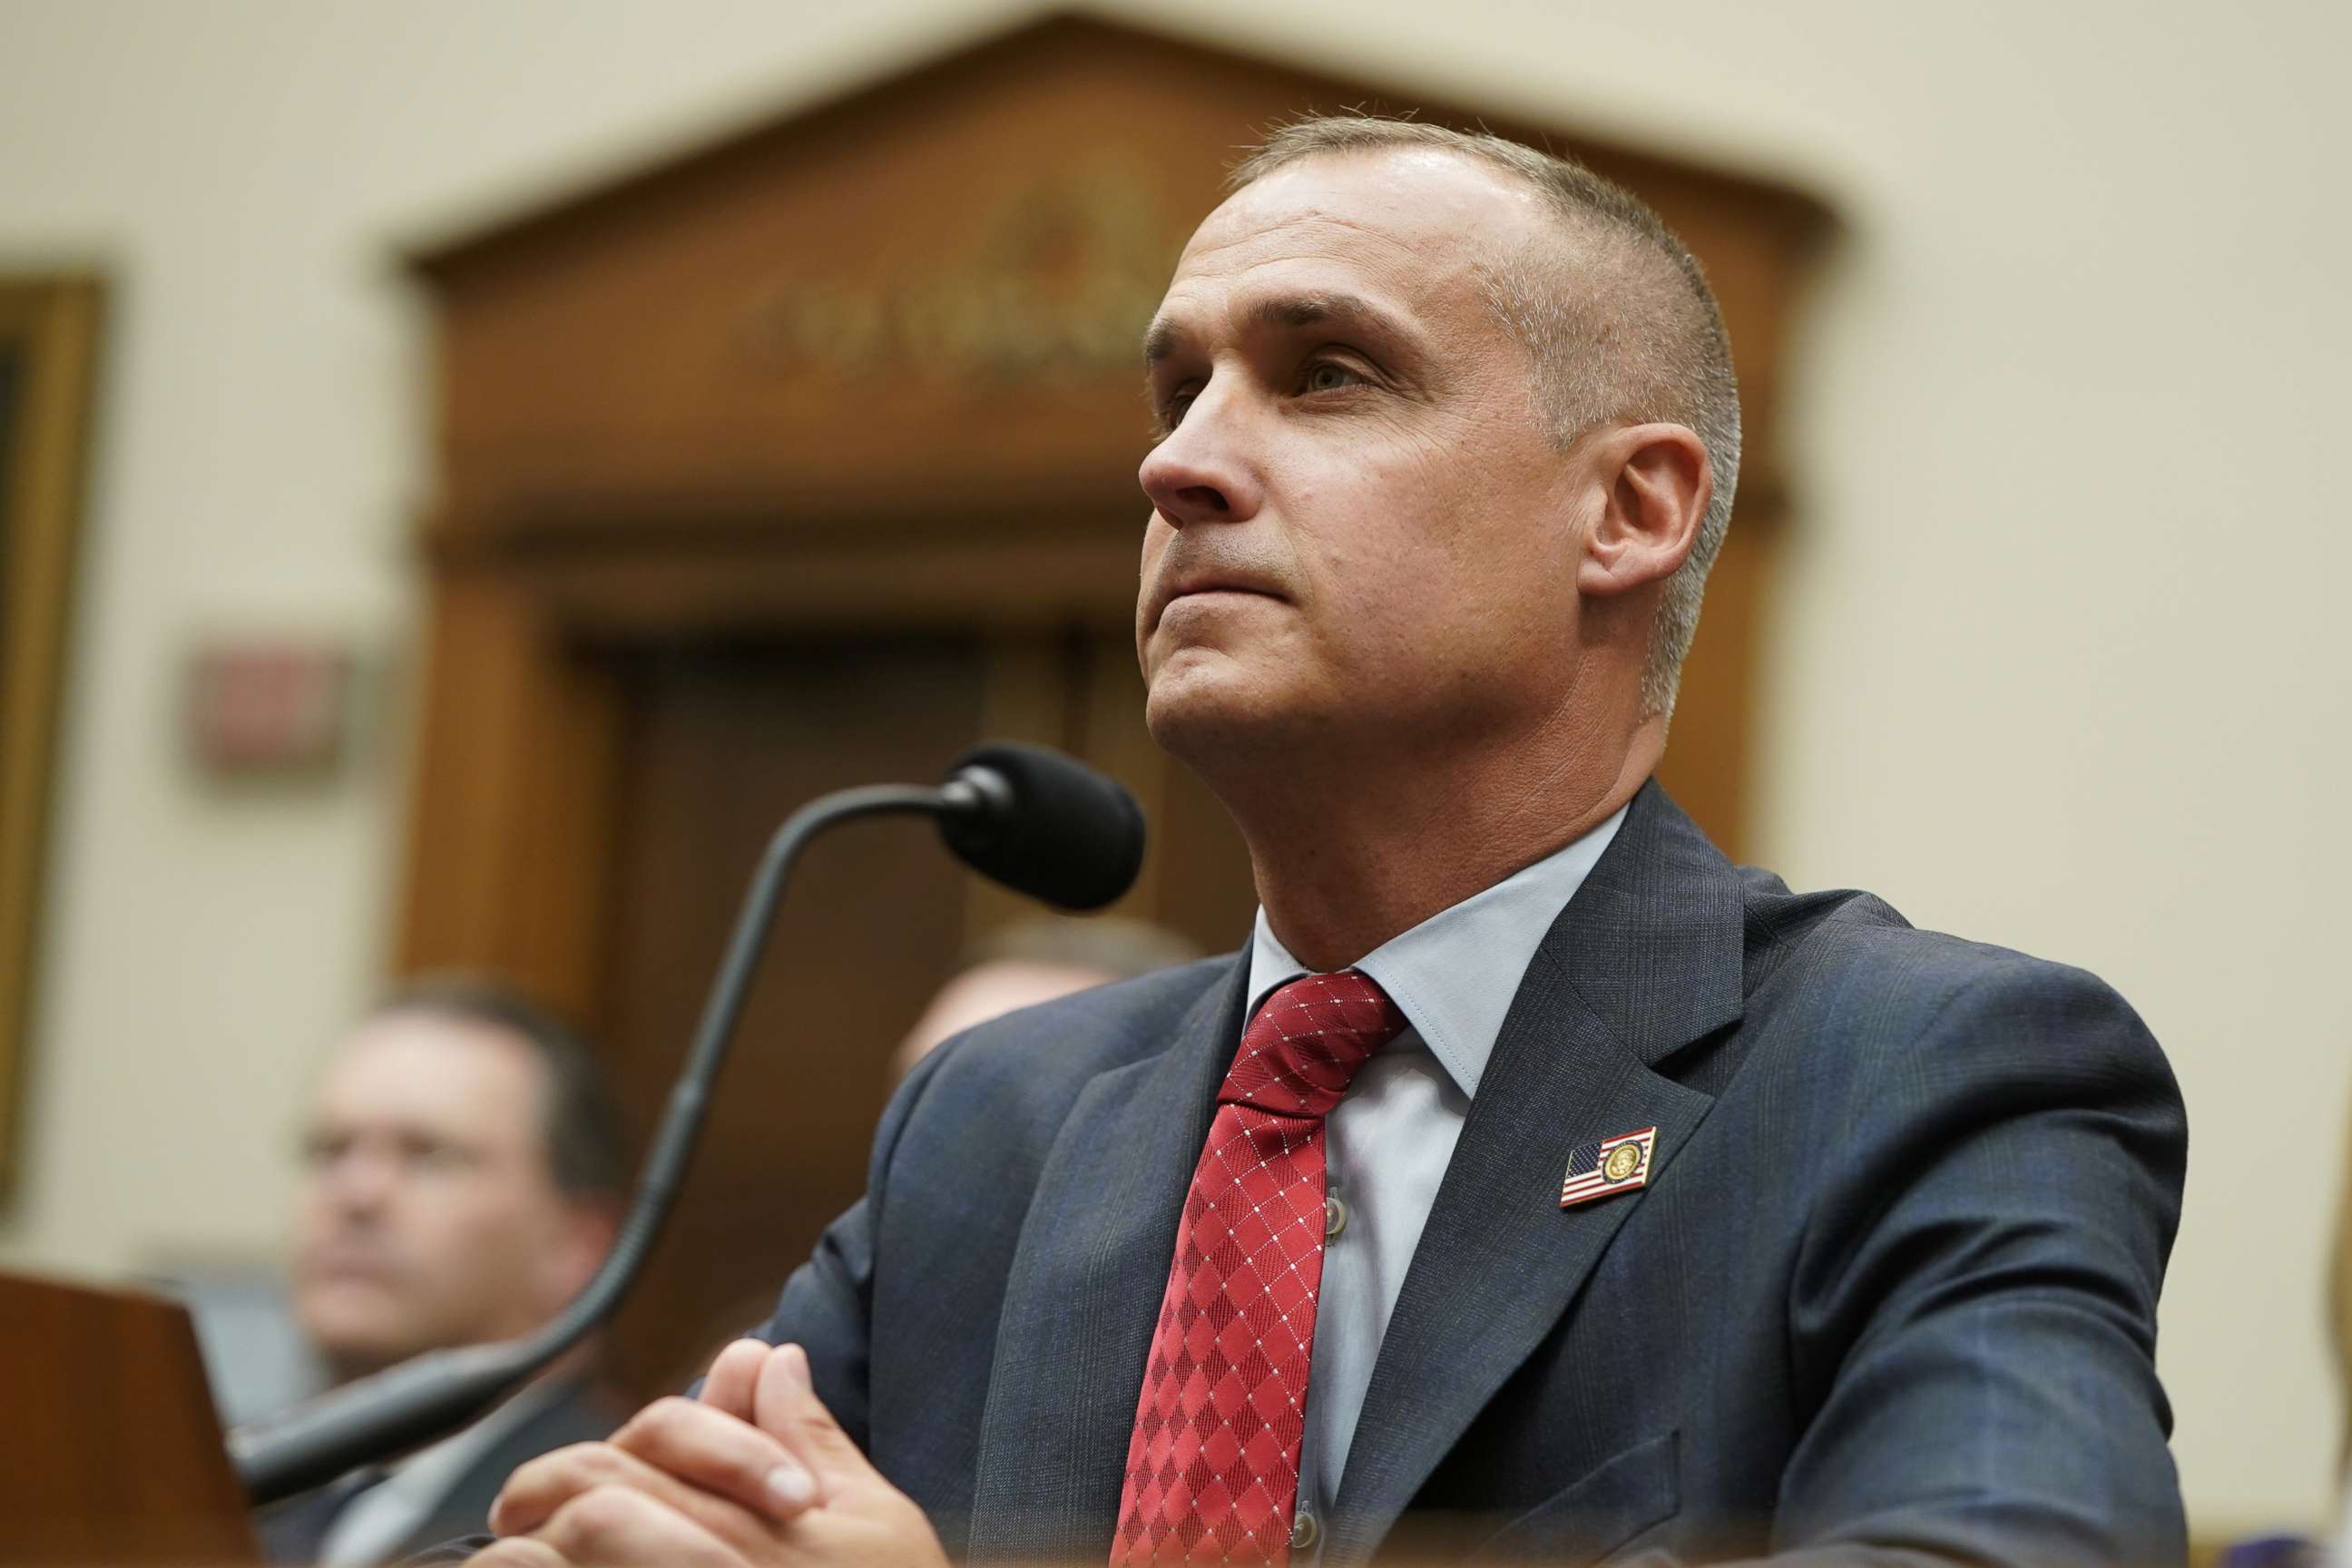 PHOTO: Corey Lewandowski, President Trump's former campaign manager and close confidant, is seated to testify before the U.S. House Judiciary Committee's first hearing of their impeachment investigation on Capitol Hill in Washington, Sept. 17, 2019.